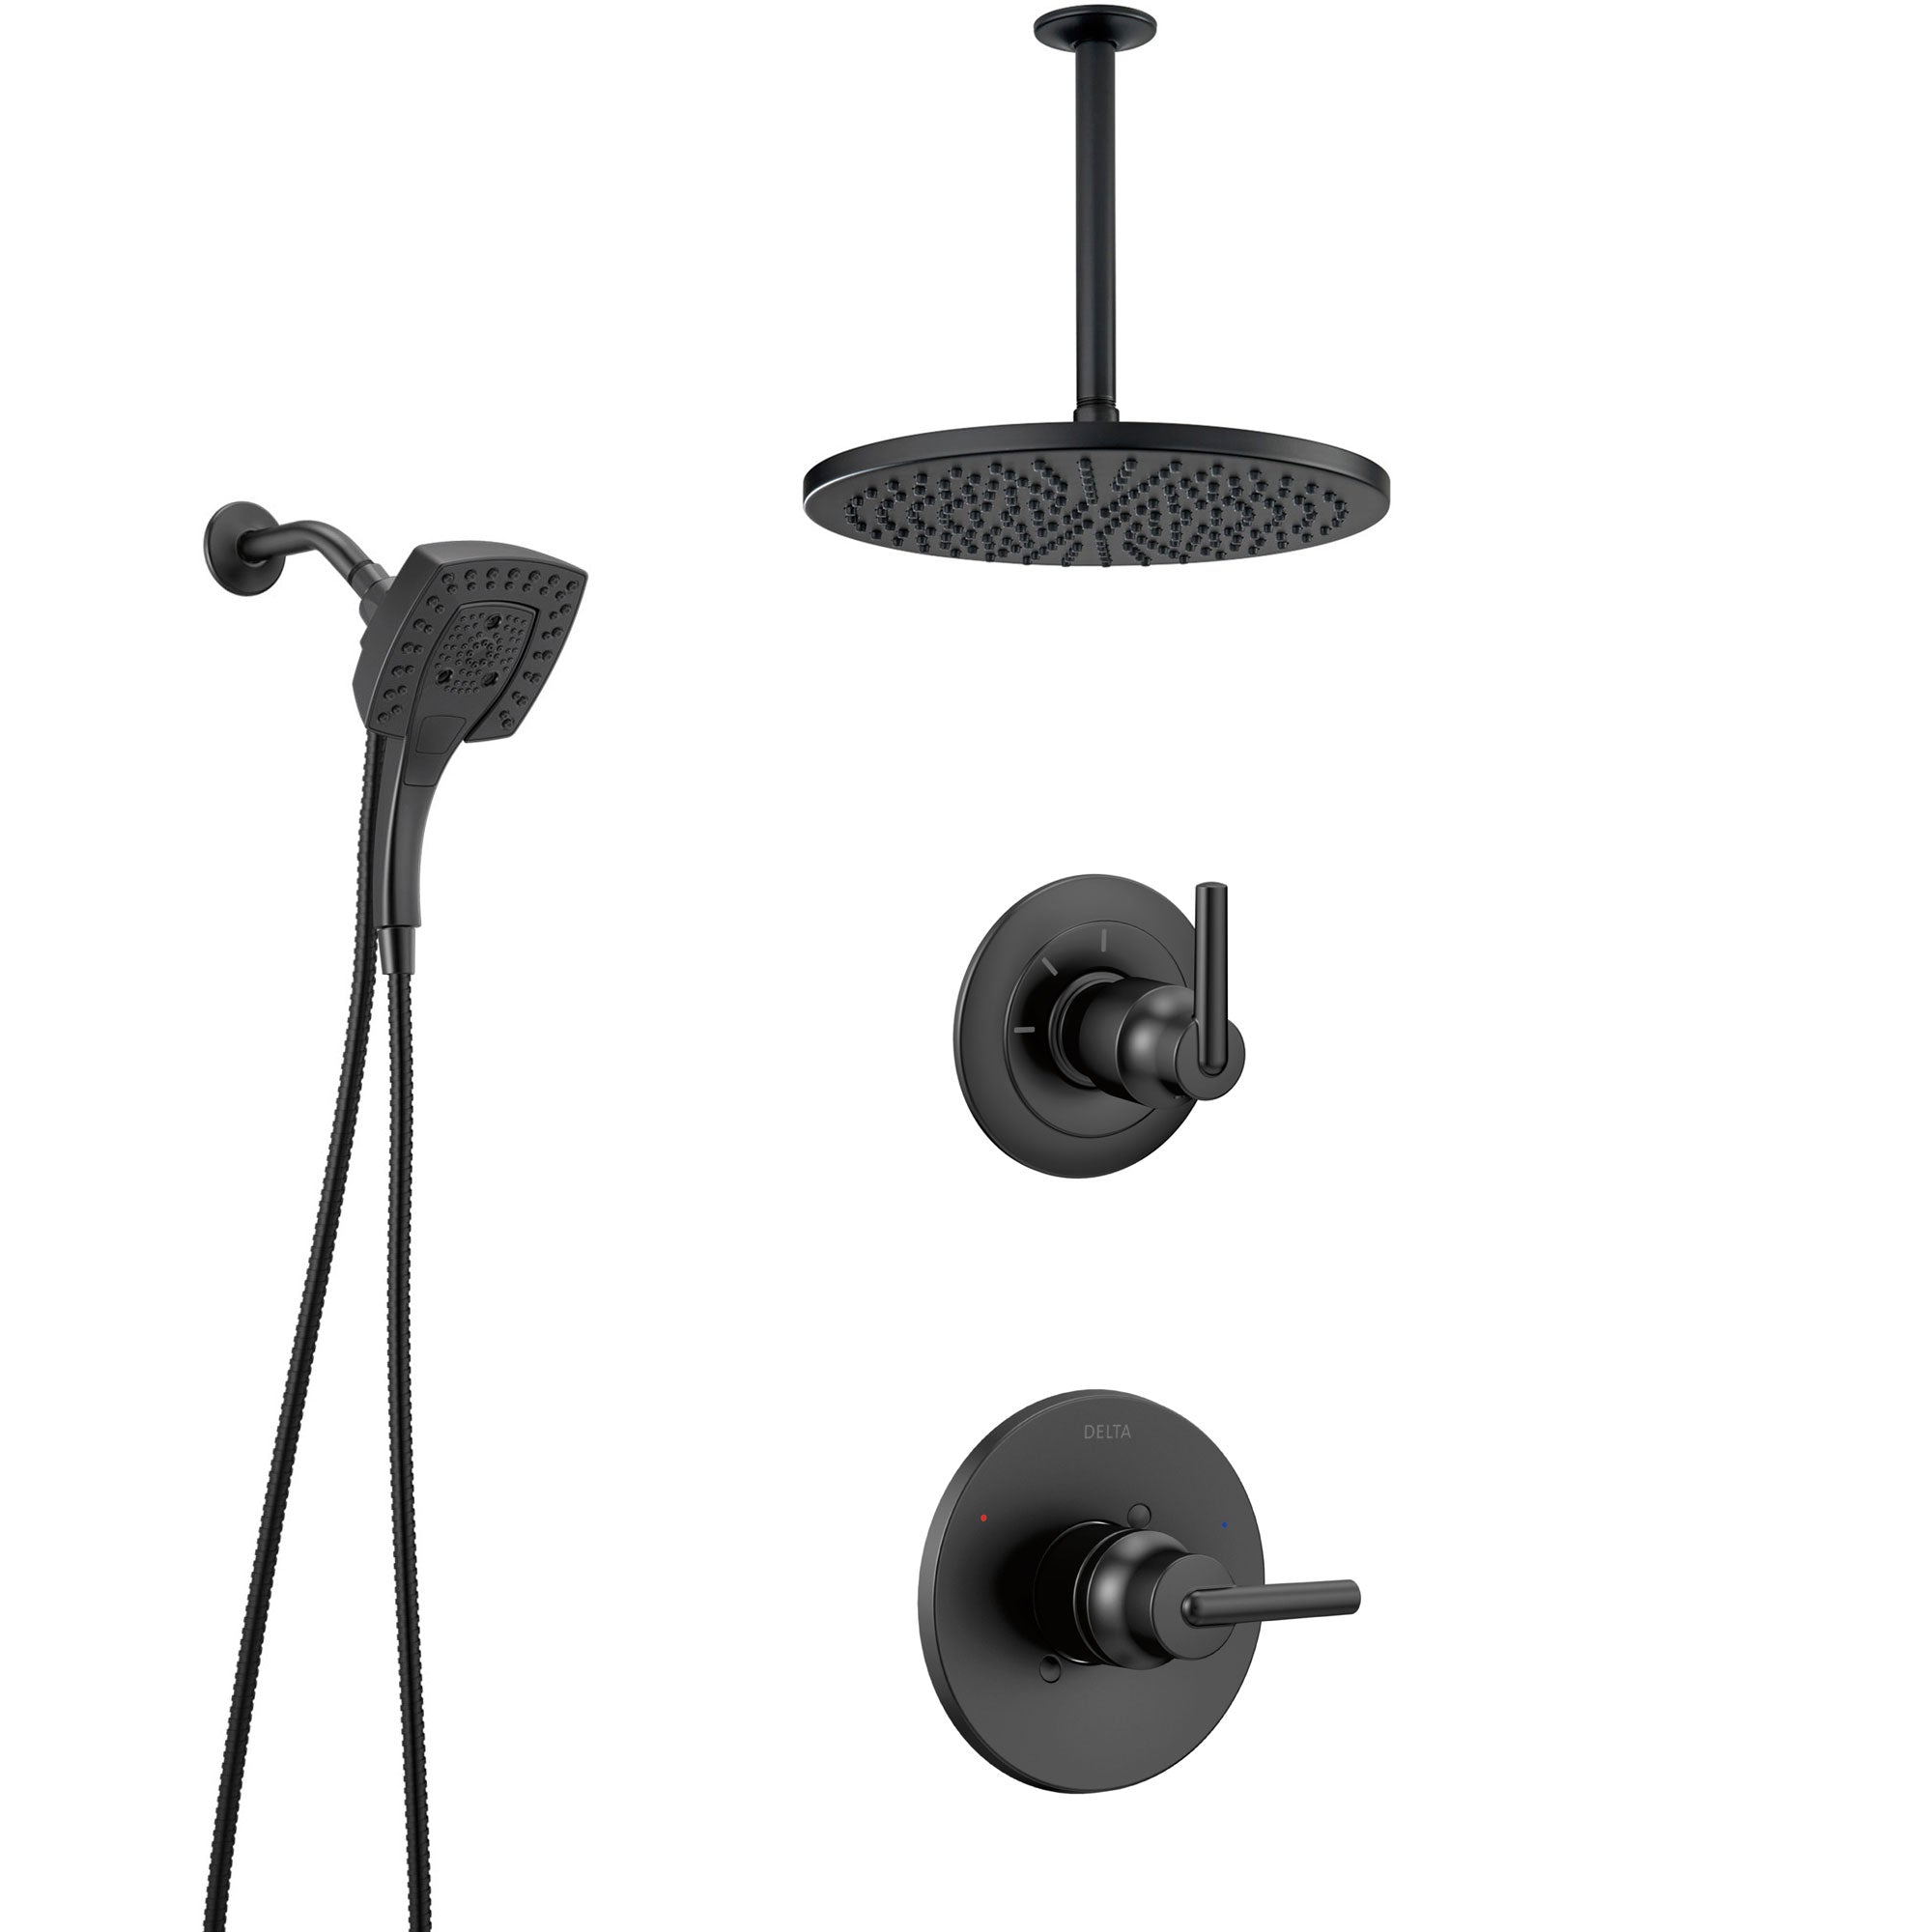 Delta Trinsic Matte Black Finish Modern Shower System and Diverter with Large Round Rain Ceiling Showerhead and In2ition Hand Shower Spray SS1459BL9